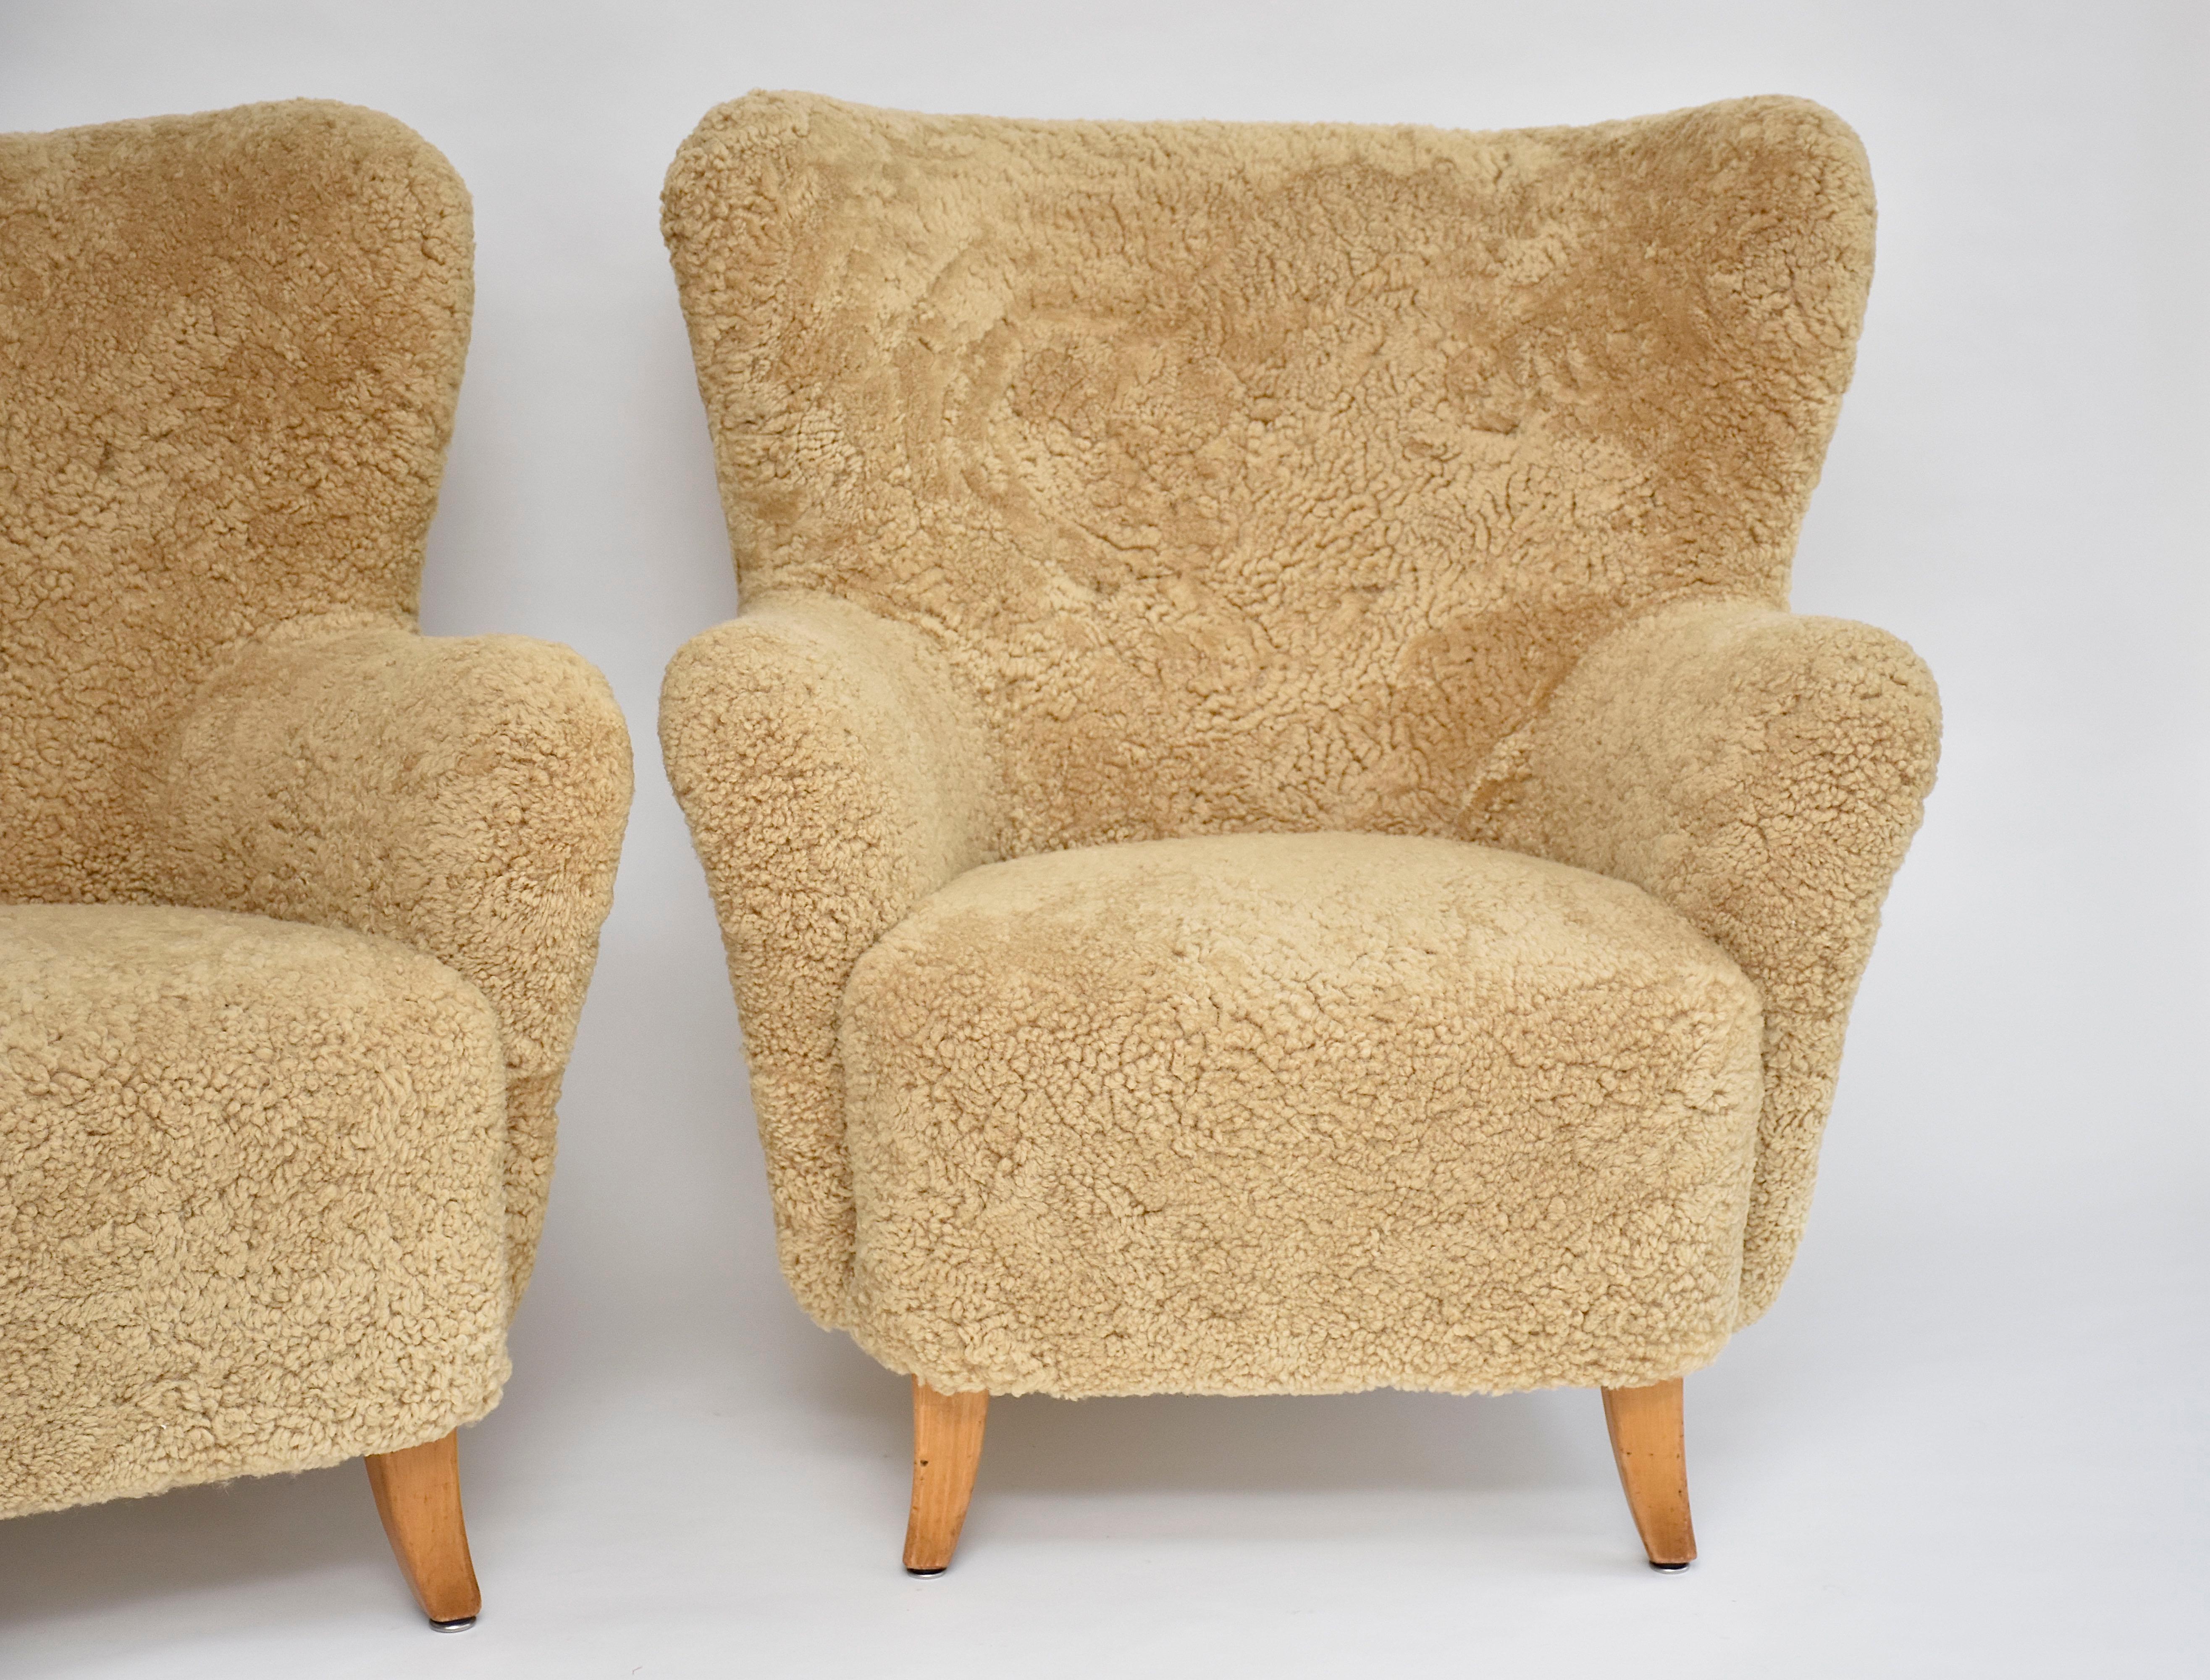 Very beautiful and unique pair of armchairs 'Laila' designed by the famous Finnish designer Ilmari Lappalainen (1918-2006) for Asko in 1948- high quality furniture company.
This iconic pair is newly upholstered in soft honey quality sheepskin and